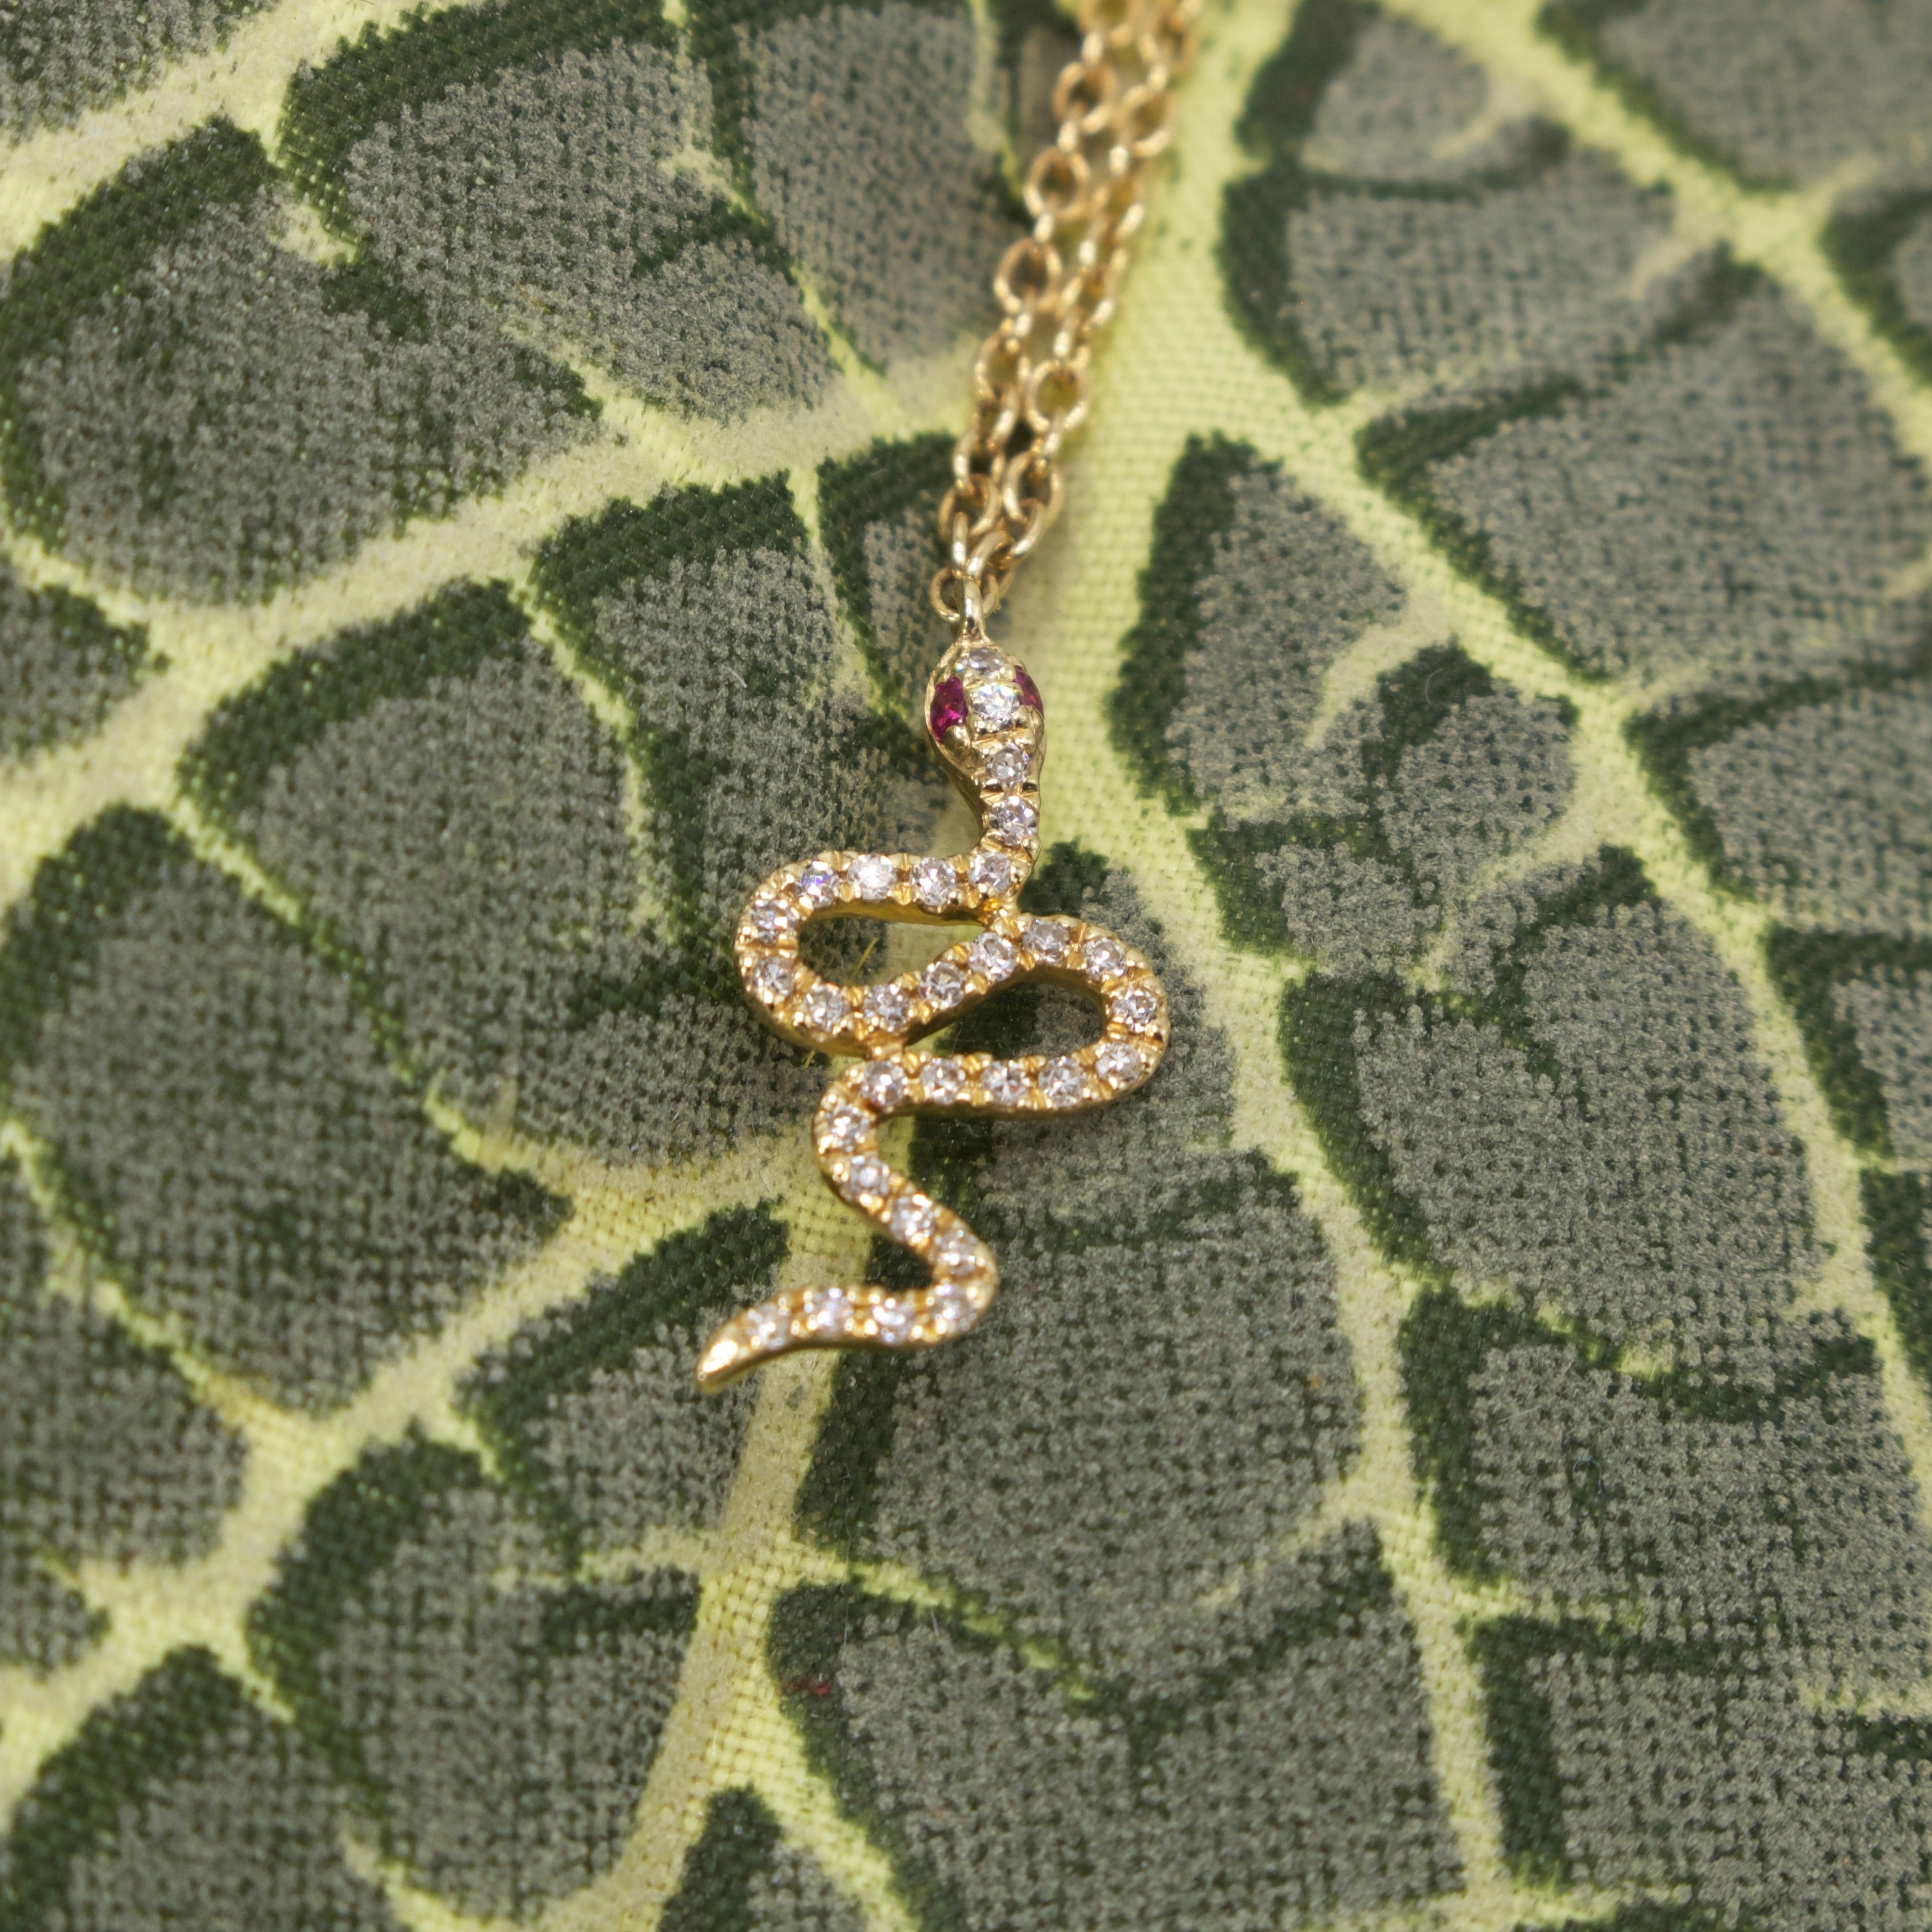 14K Yellow Gold Necklace with Diamond and Ruby Undulating Snake